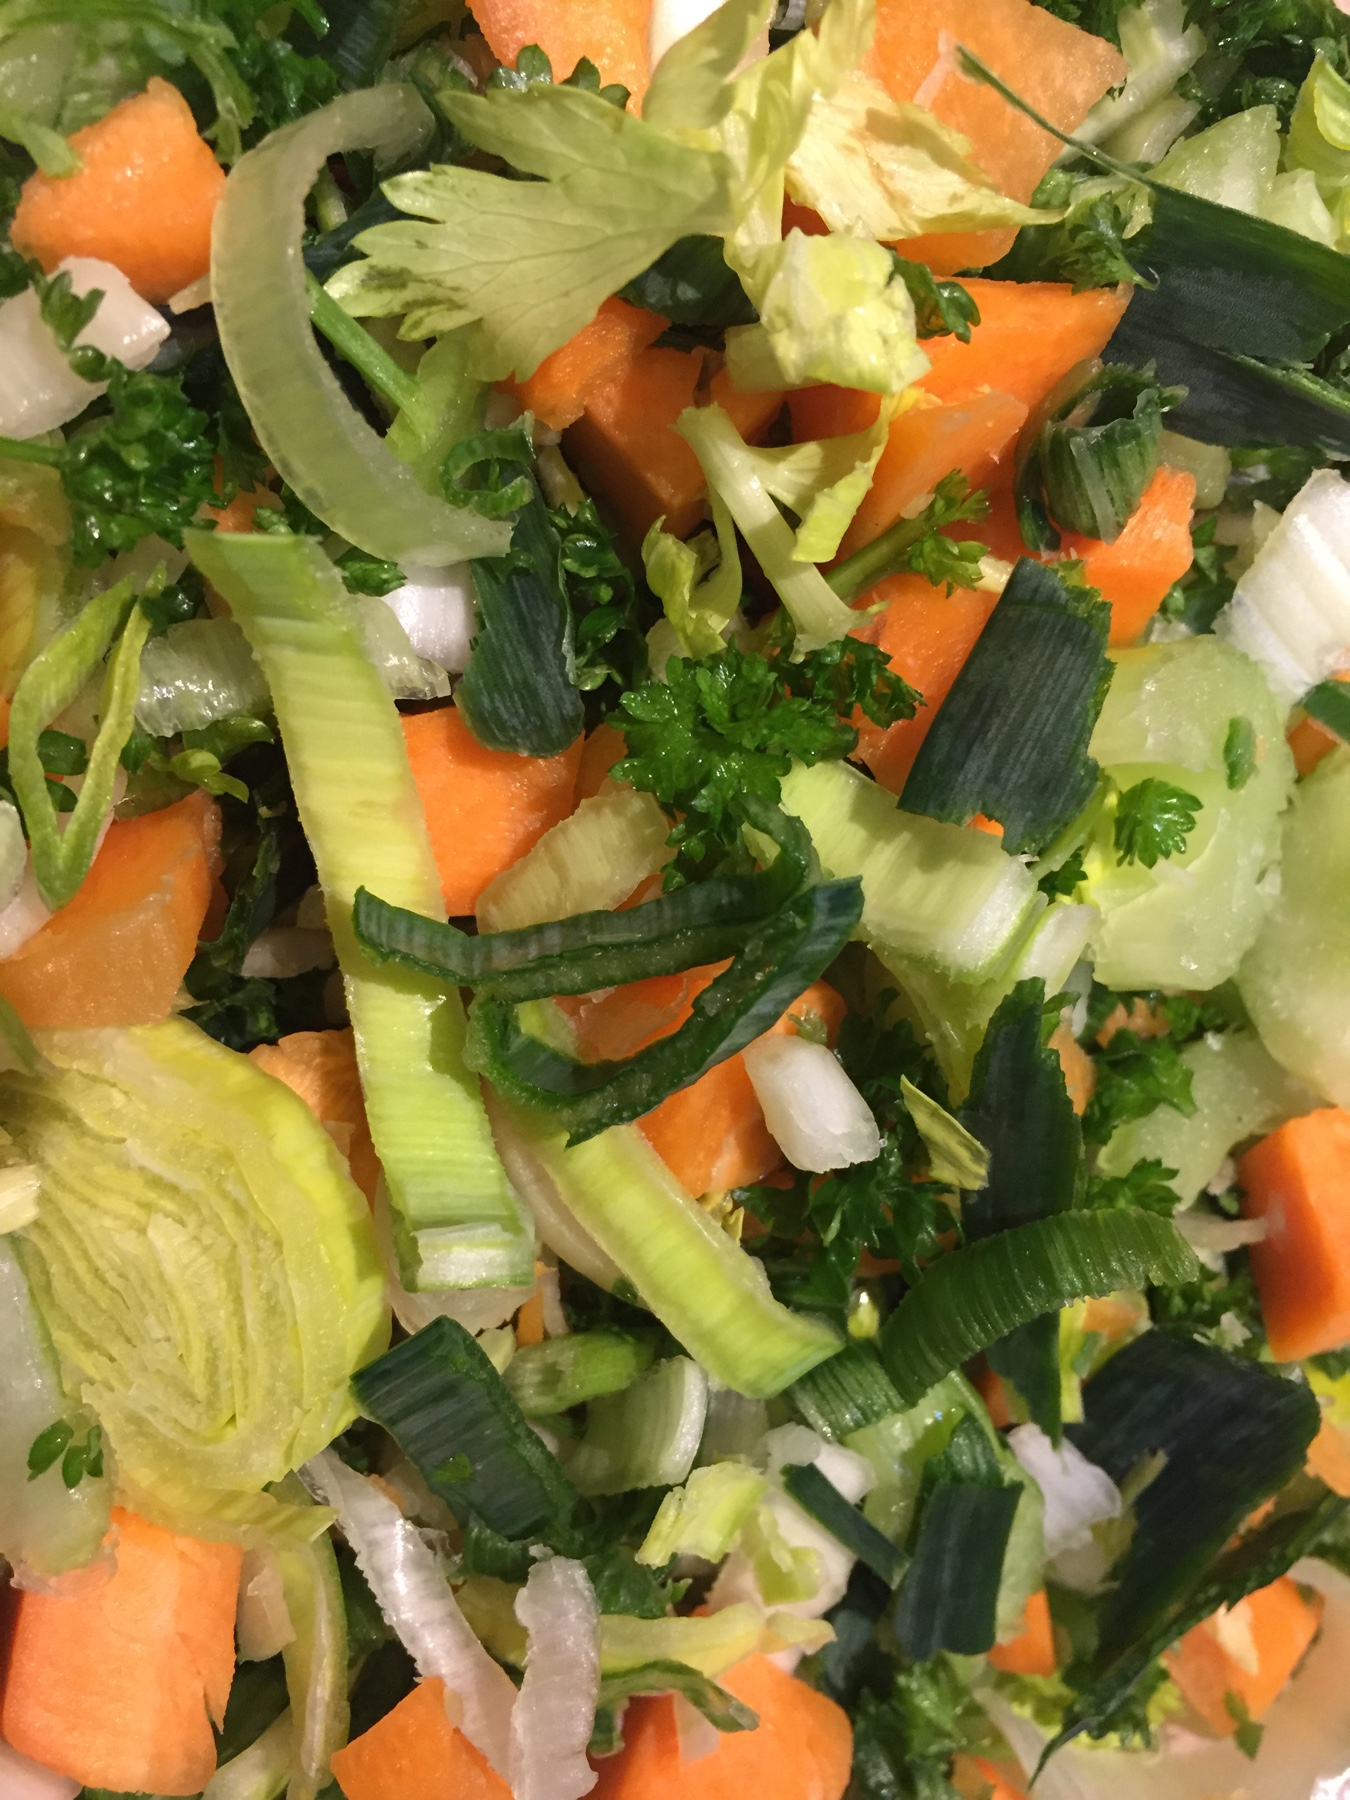 Chopped soup vegetables, carrot, celery, leek, and flat leaf parsley (including the stalks)